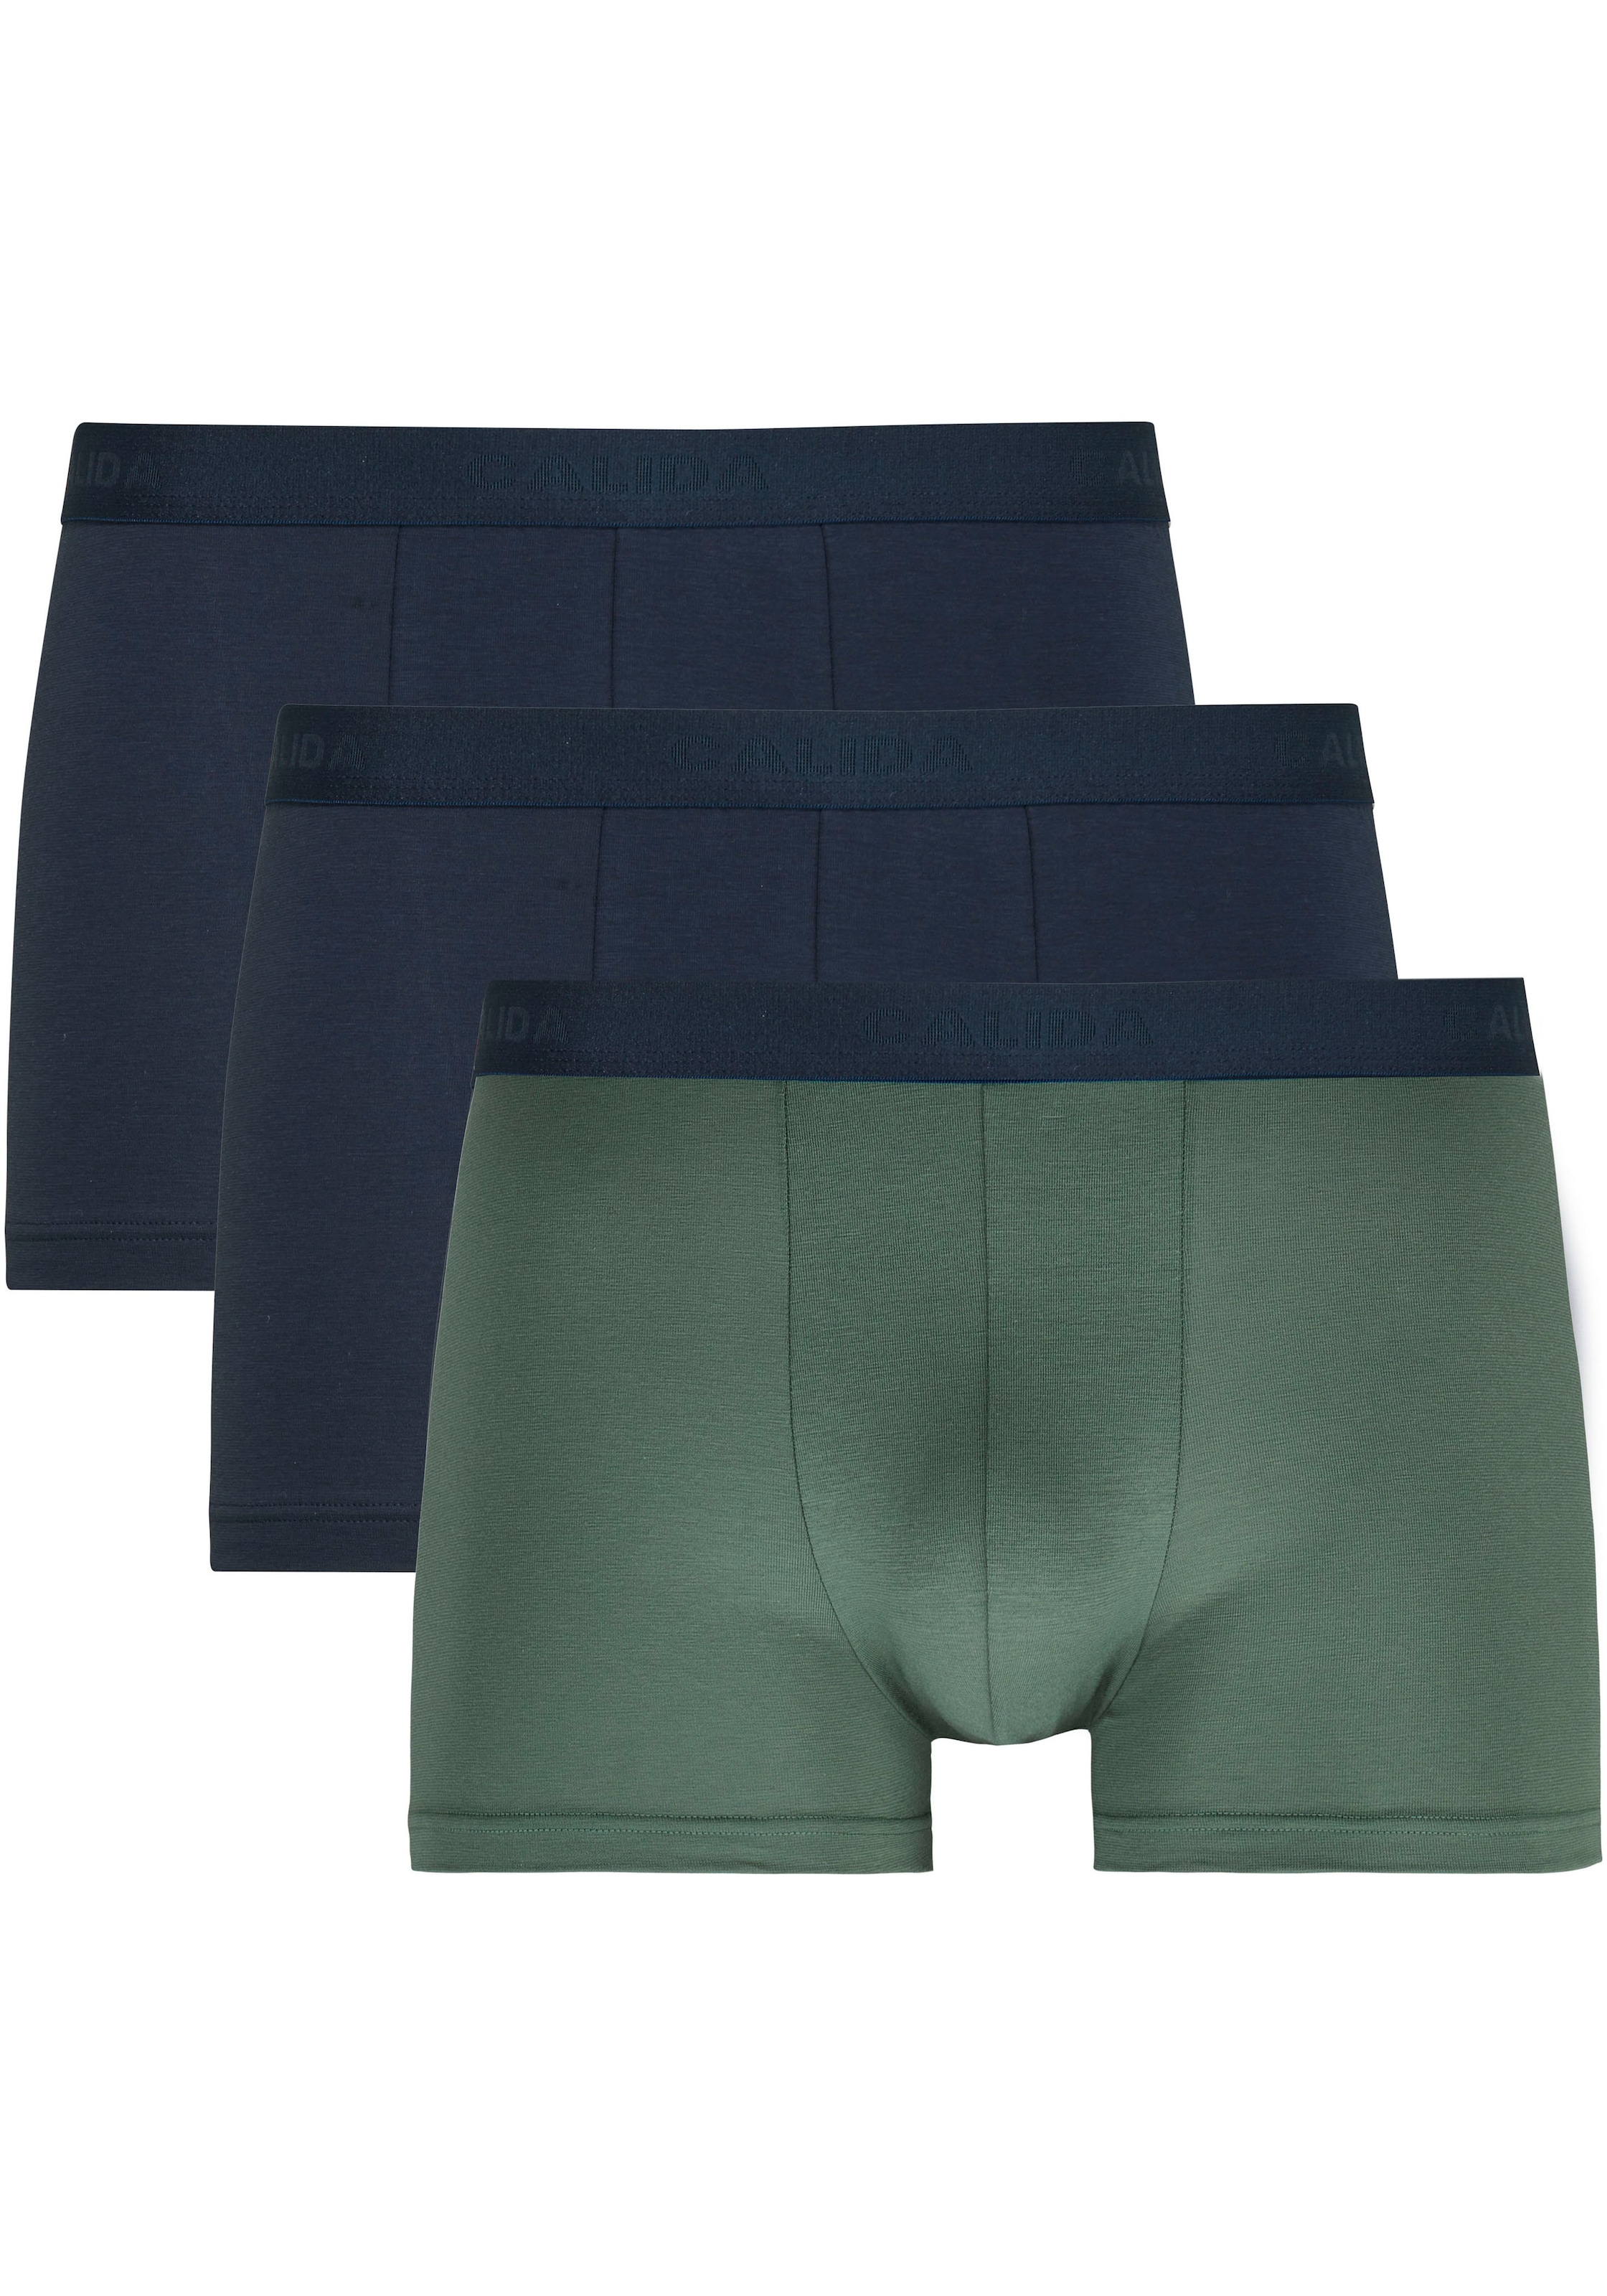 Boxer »Natural Benefit«, (Packung, 3 St.), Boxer-Brief formstabile Single Jersey-Qualität